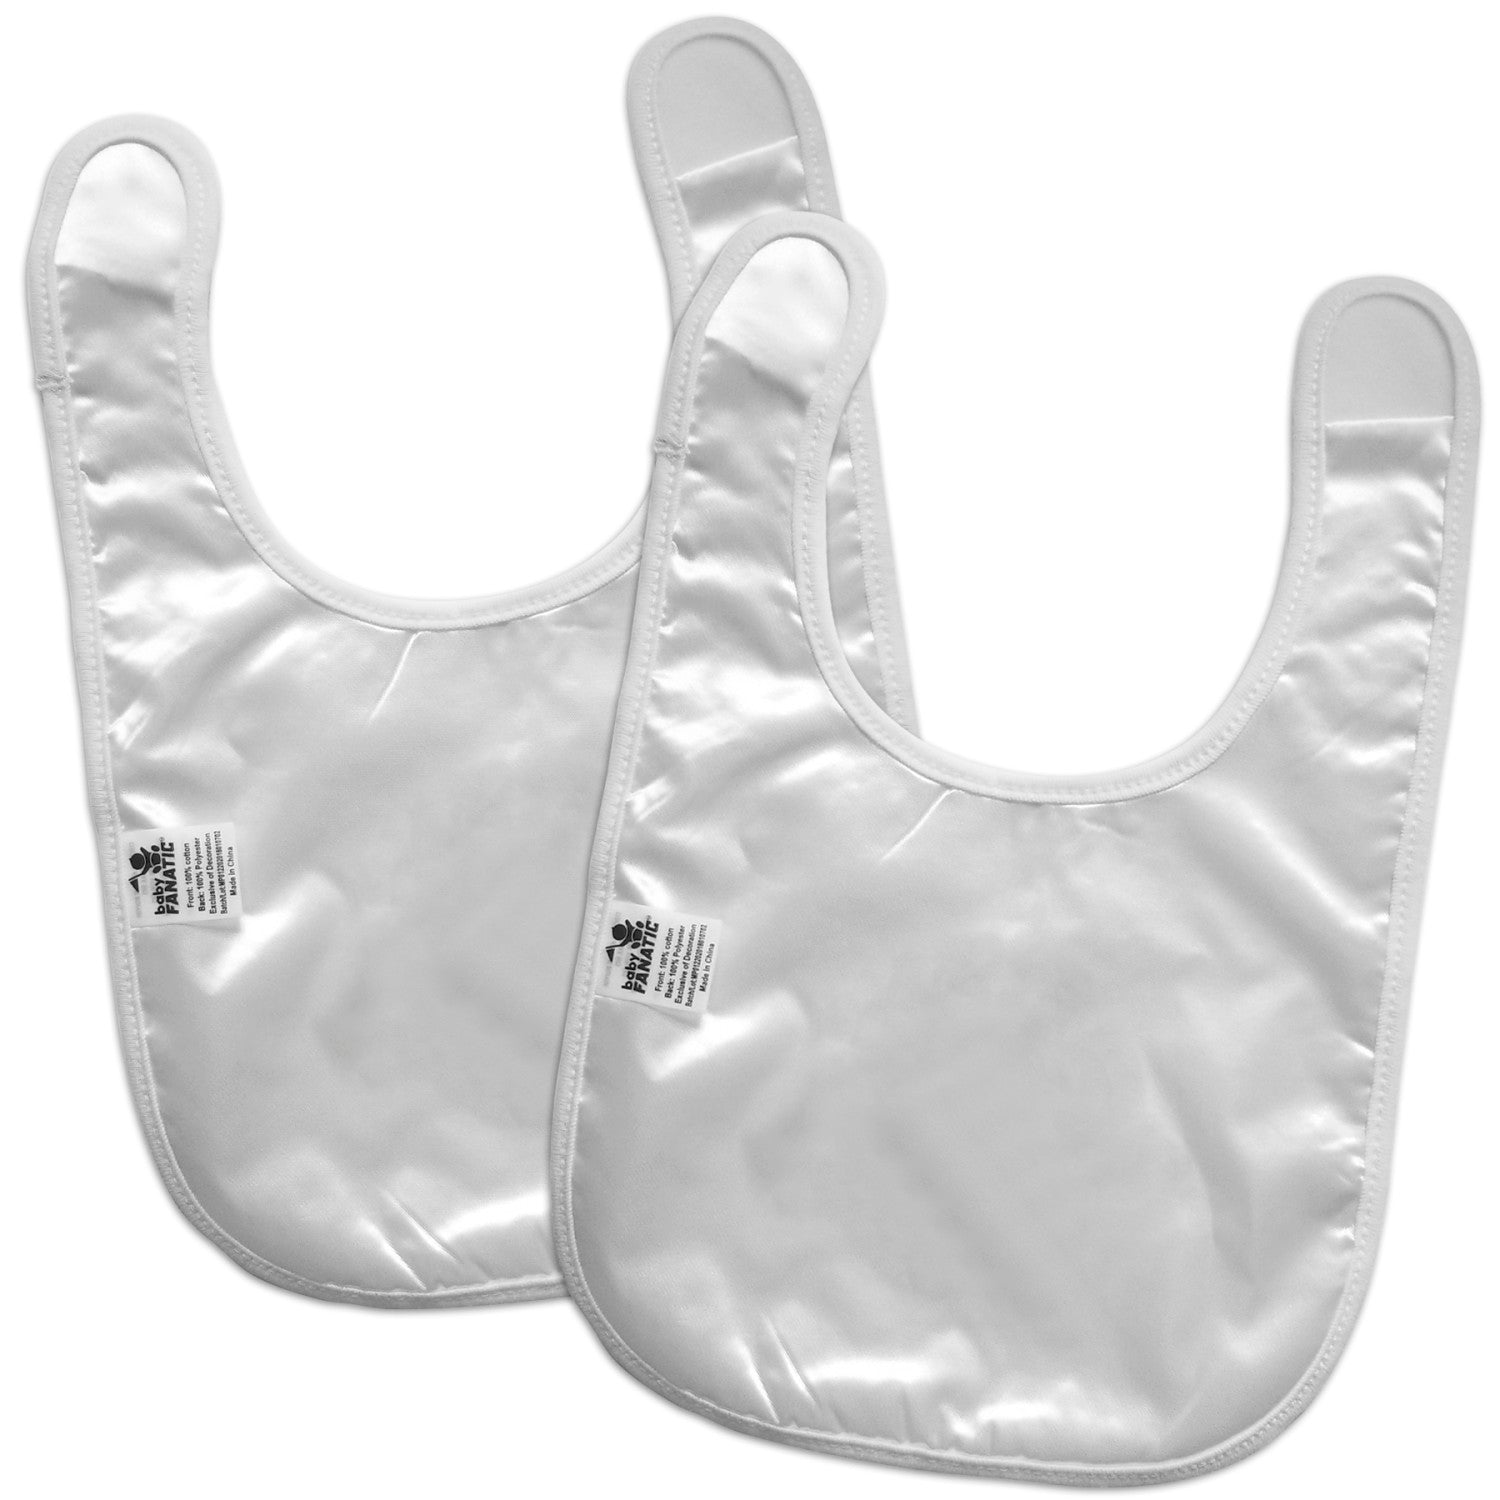 Baby Fanatic Officially Licensed Unisex Baby Bibs 2 Pack - MLB